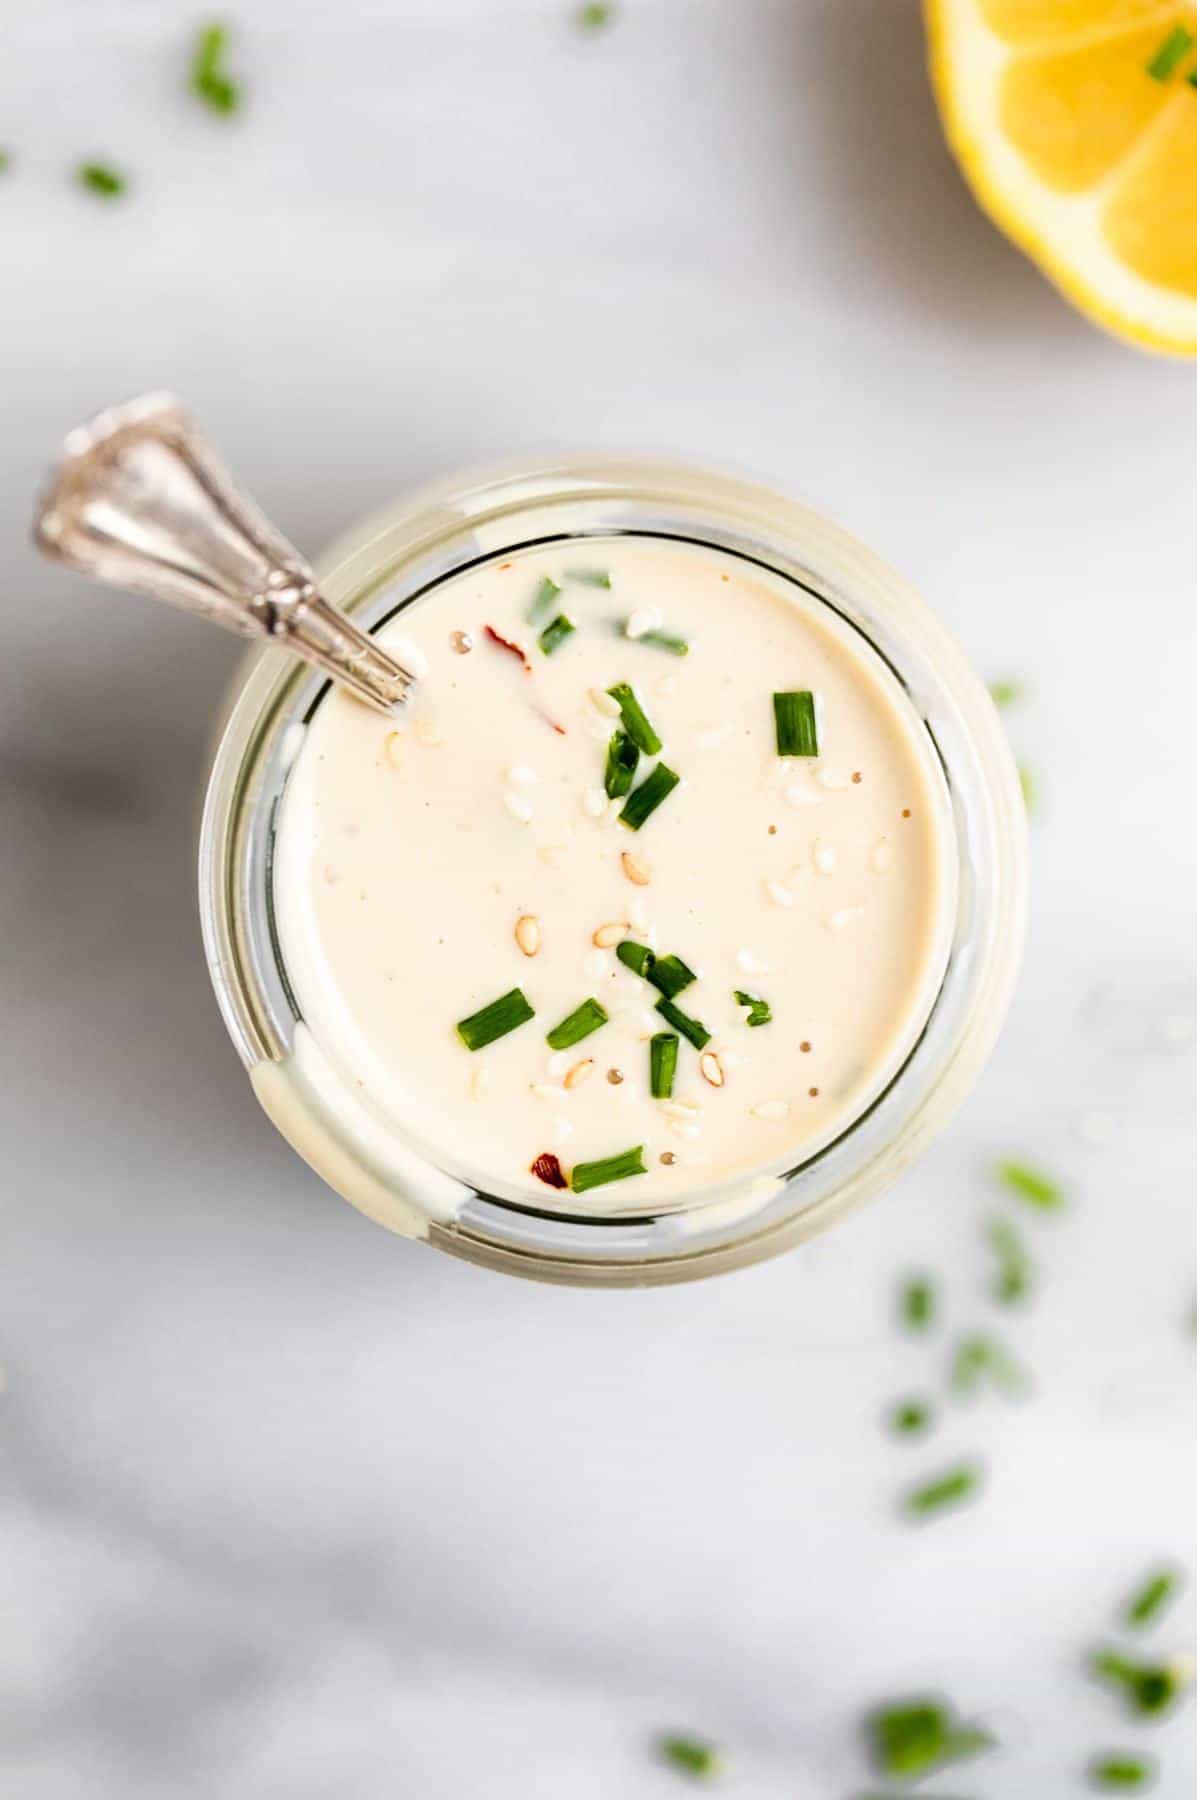 Tahini dressing in a glass jar with lemon wedges on the side.